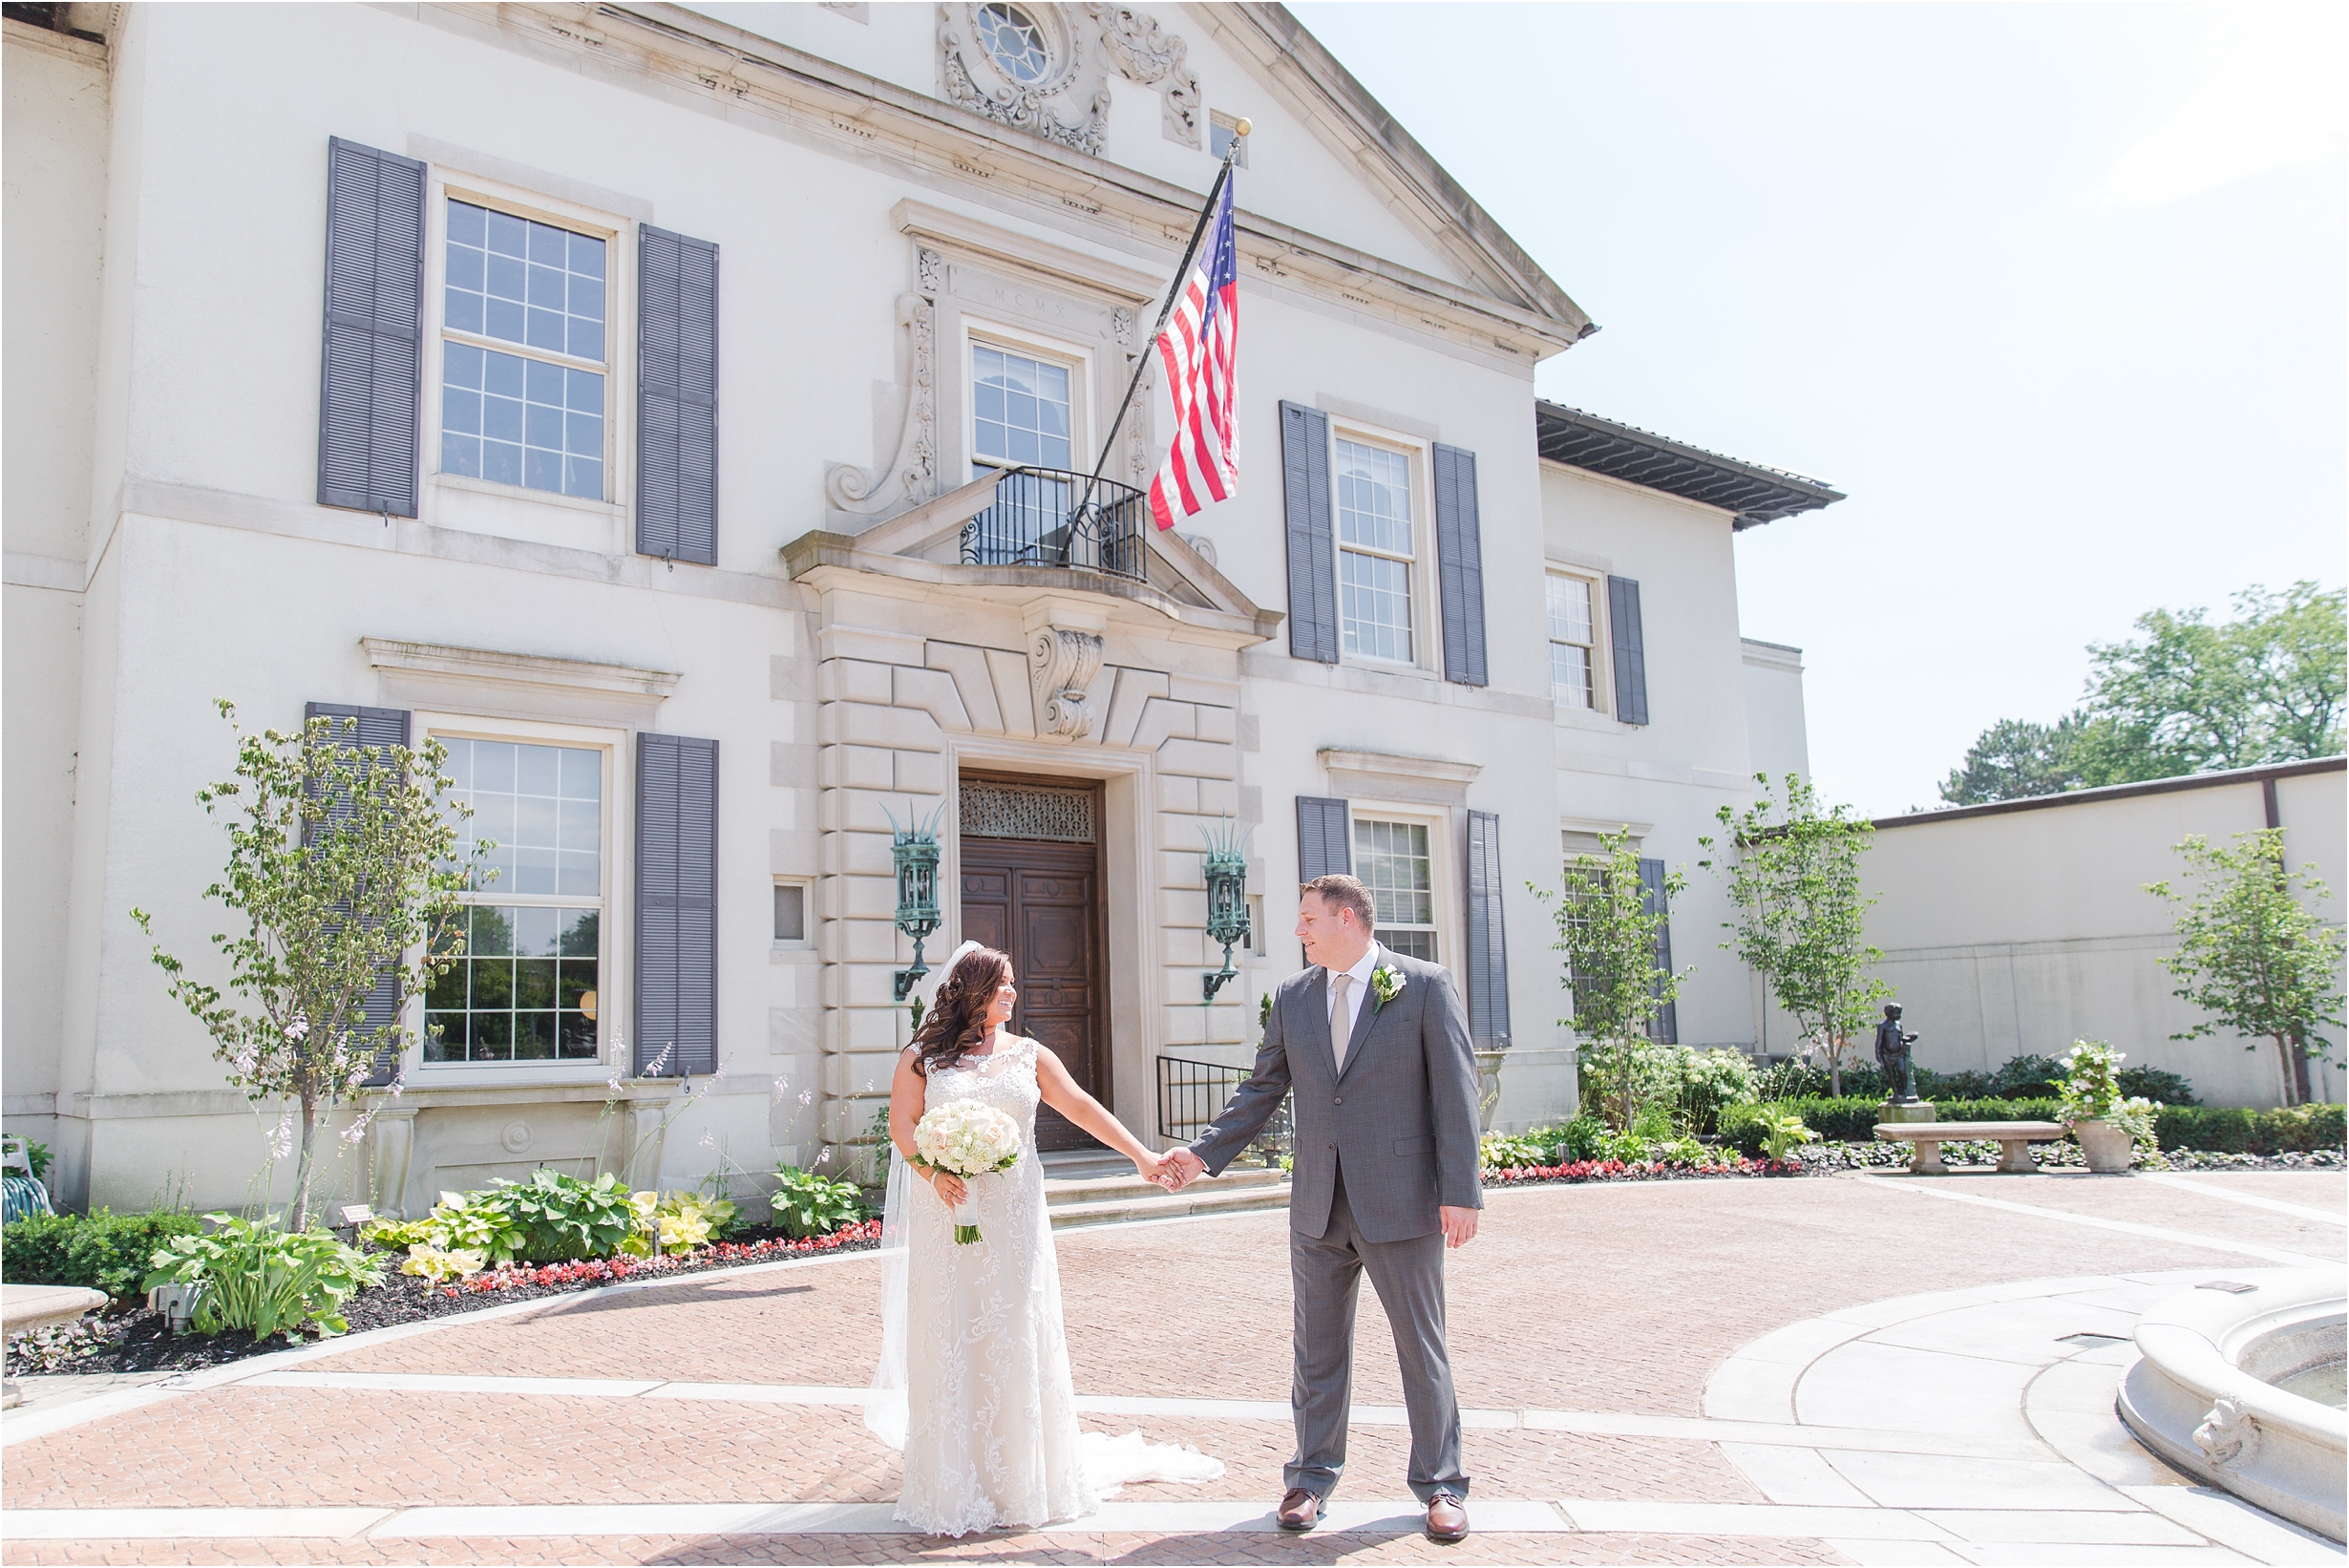 romantic-timeless-candid-wedding-photos-at-the-war-memorial-in-grosse-pointe-mi-by-courtney-carolyn-photography_0005.jpg